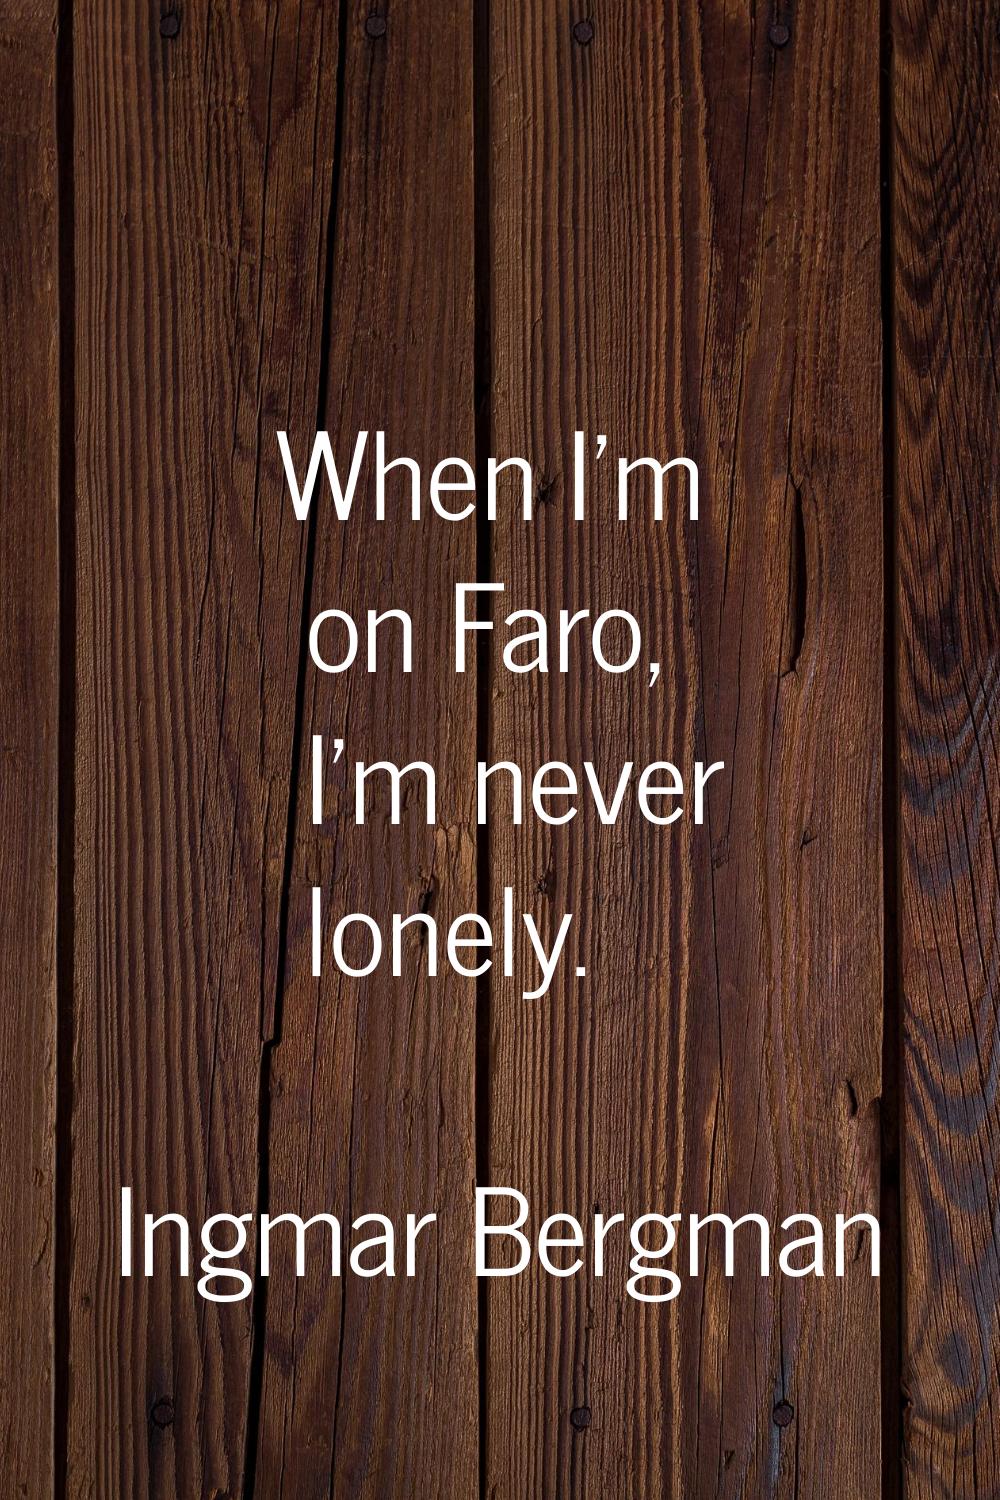 When I'm on Faro, I'm never lonely.